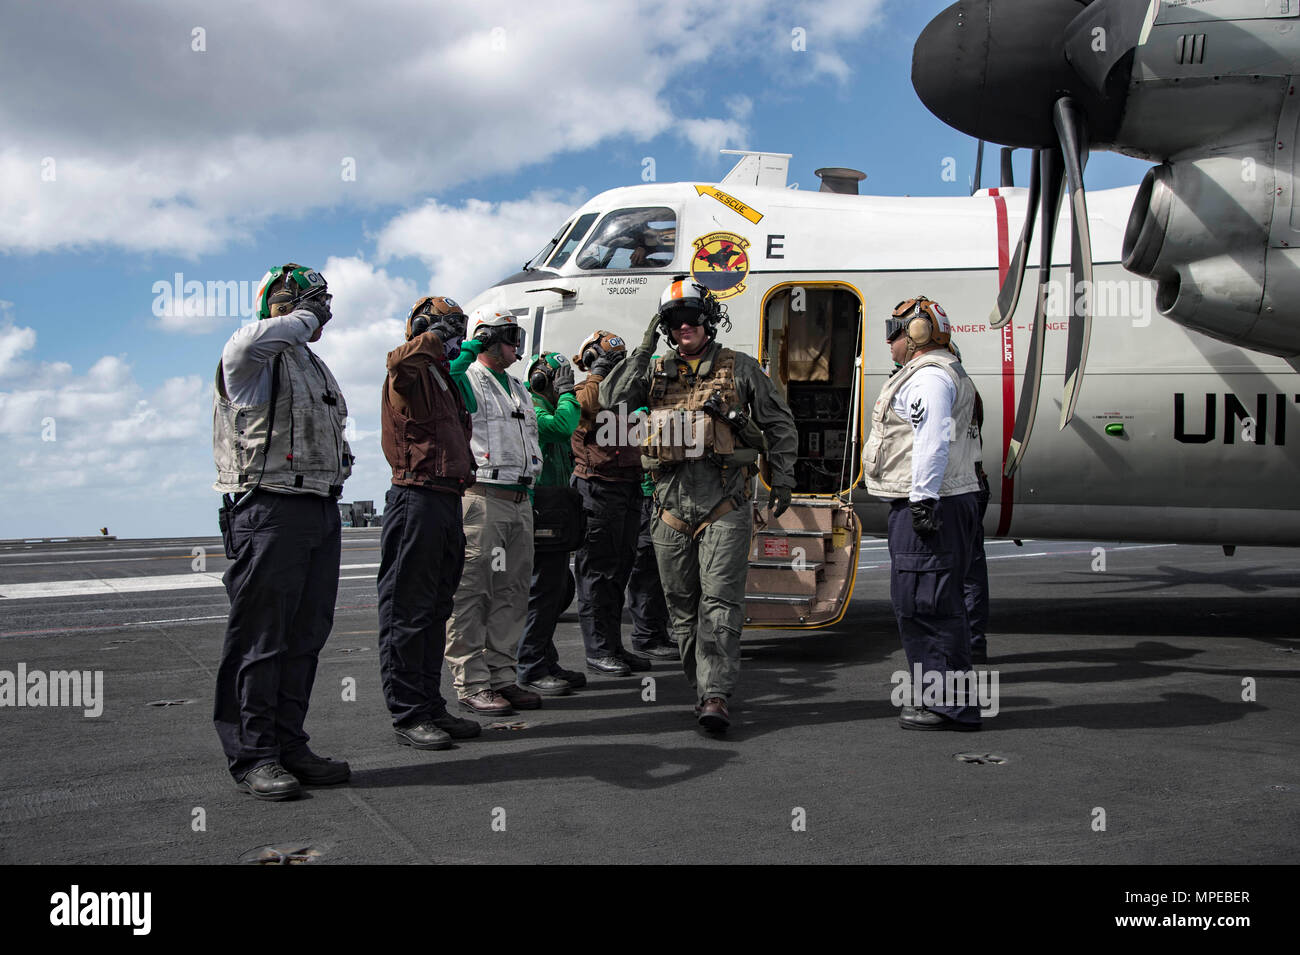 170211-N-OS569-435  ATLANTIC OCEAN (Feb. 11, 2017) Cmdr. Mark Litowski, commanding officer of the Rawhides of Fleet Logistics Support Squadron (VRC) 40, salutes the sideboys as he exits the cockpit of a C-2A Greyhound after makiing the last arrested landing of his career on the flight deck of the aircraft carrier USS Dwight D. Eisenhower (CVN 69) (Ike). Ike is currently conducting aircraft carrier qualifications during the sustainment phase of the Optimized Fleet Response Plan (OFRP). (U.S. Navy photo by Mass Communication Specialist Seaman Zach Sleeper) Stock Photo